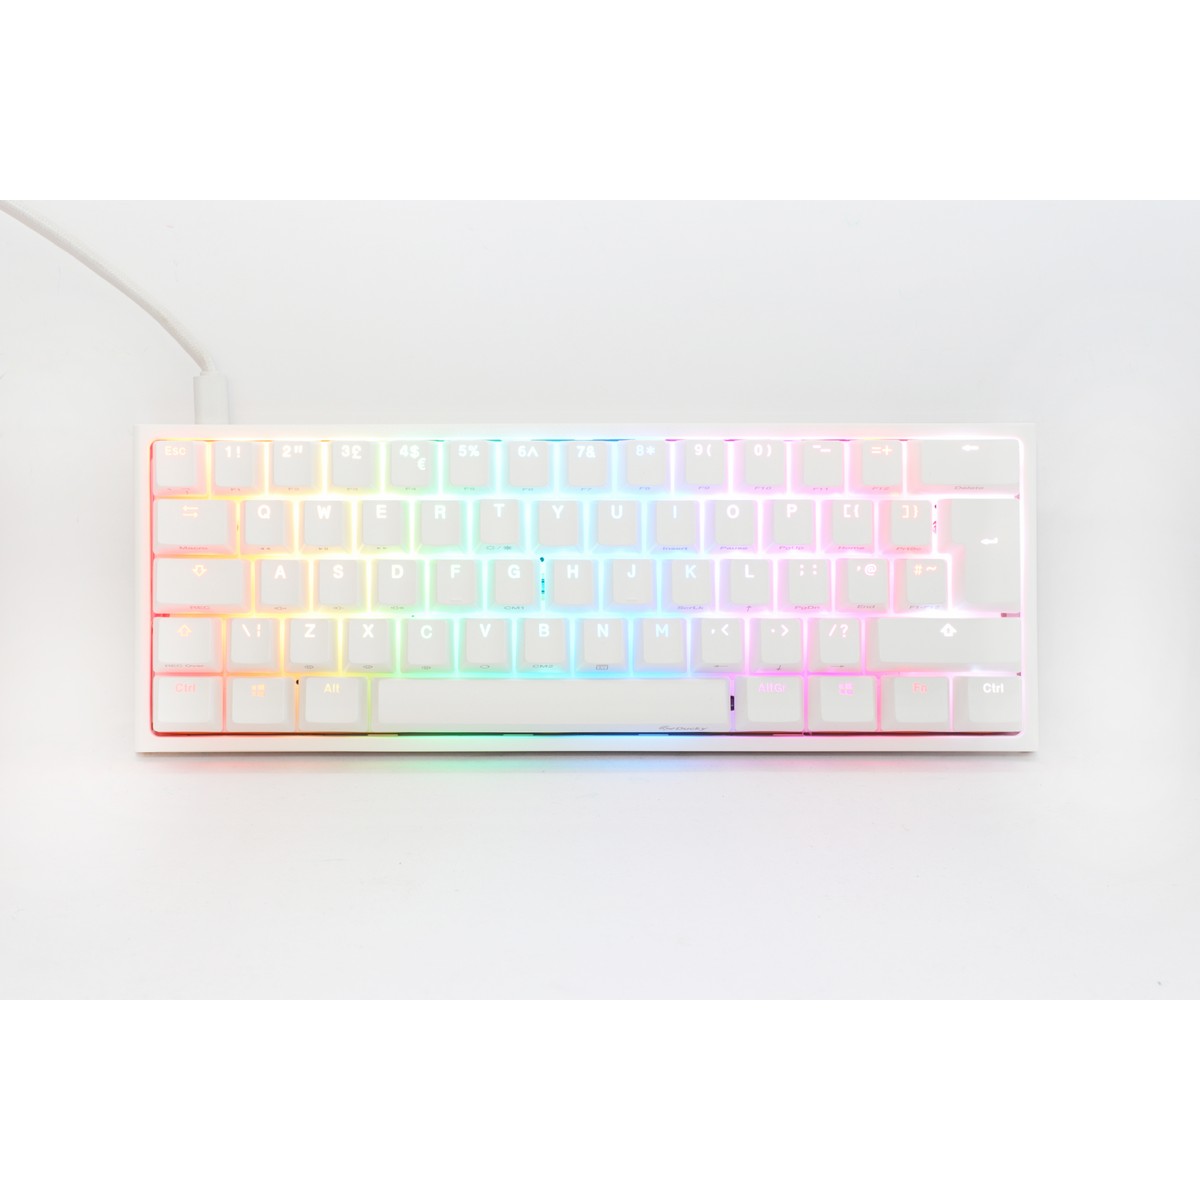 Ducky - Ducky One 2 Pro Mini 60% Mechanical Gaming Keyboard MX Cherry Brown Switch White Frame - UK Layout